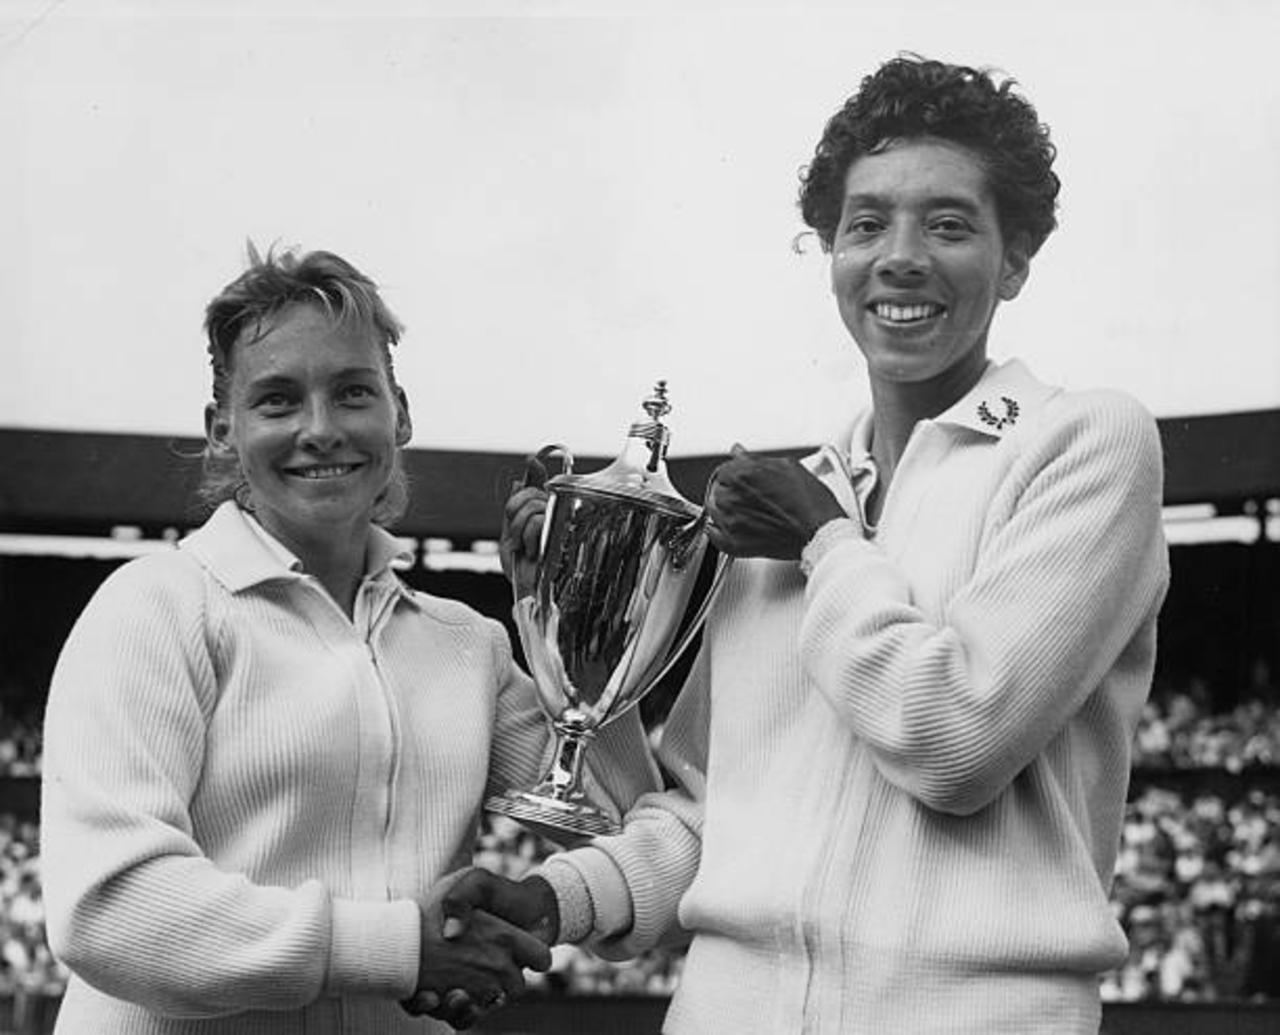 This Day in History: Althea Gibson Becomes First African-American on US Tennis Tour 8/22